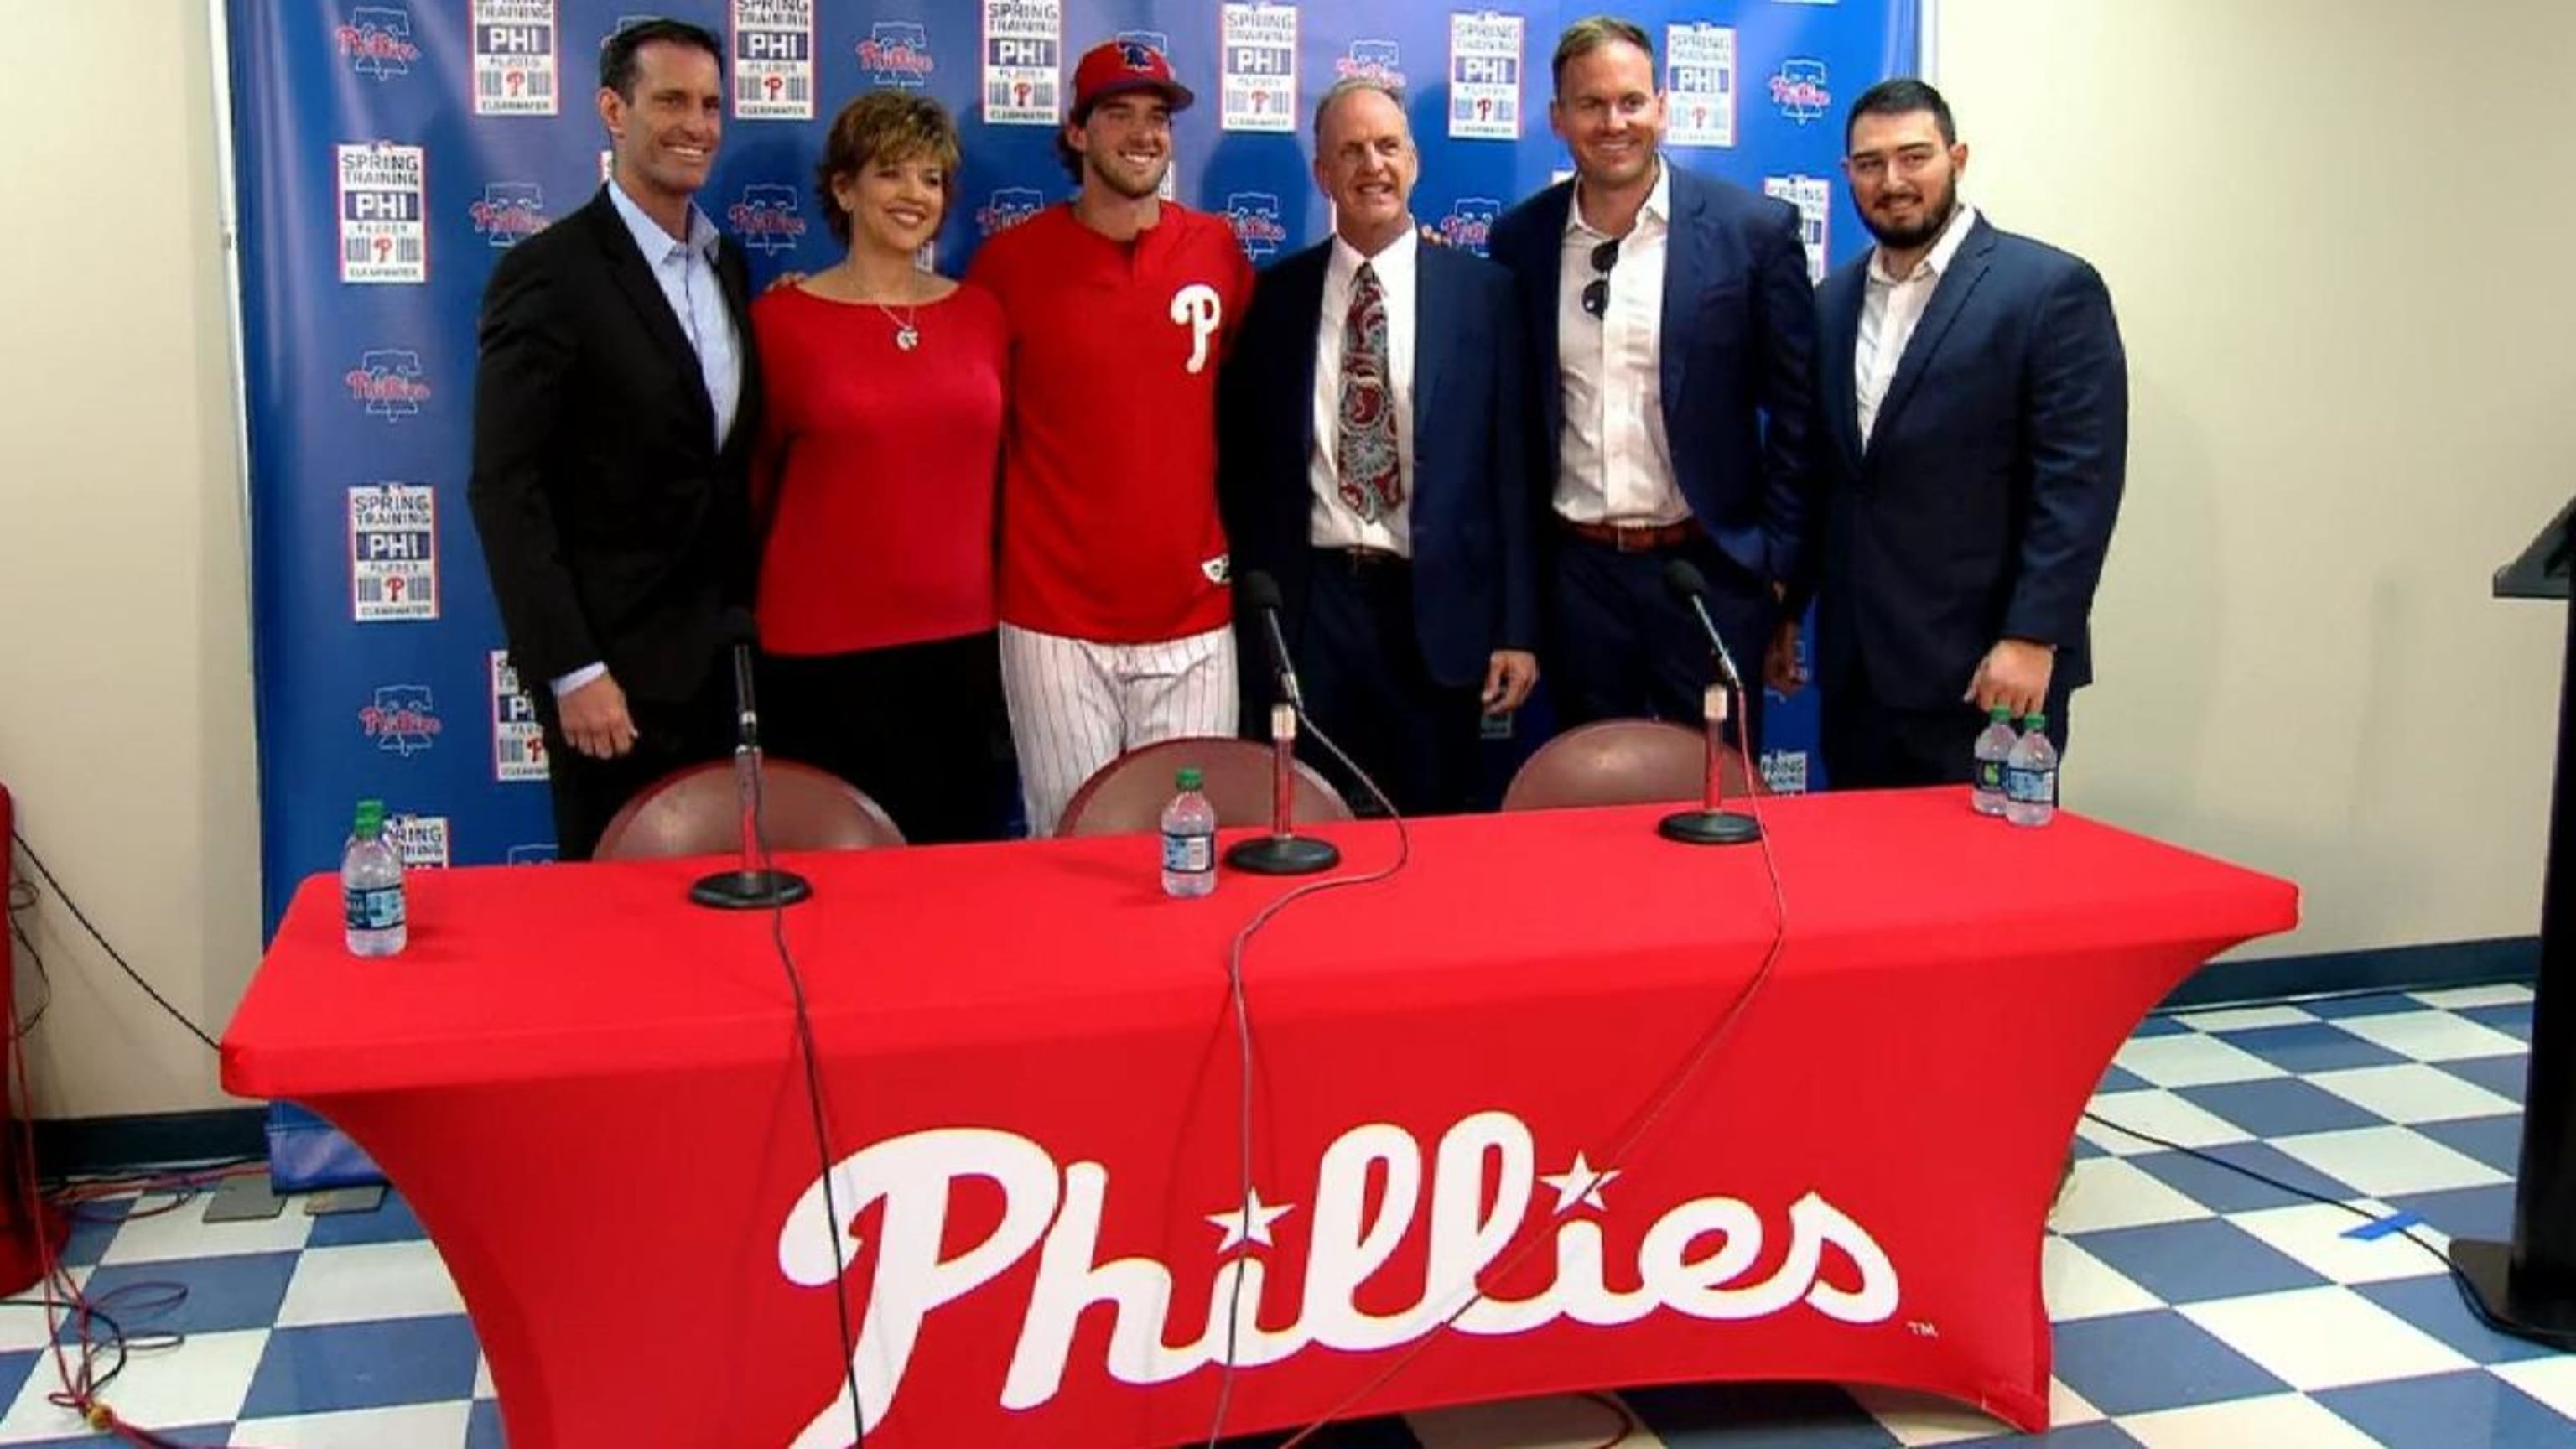 MLB Insider reports Aaron Nola turned down huge contract extension